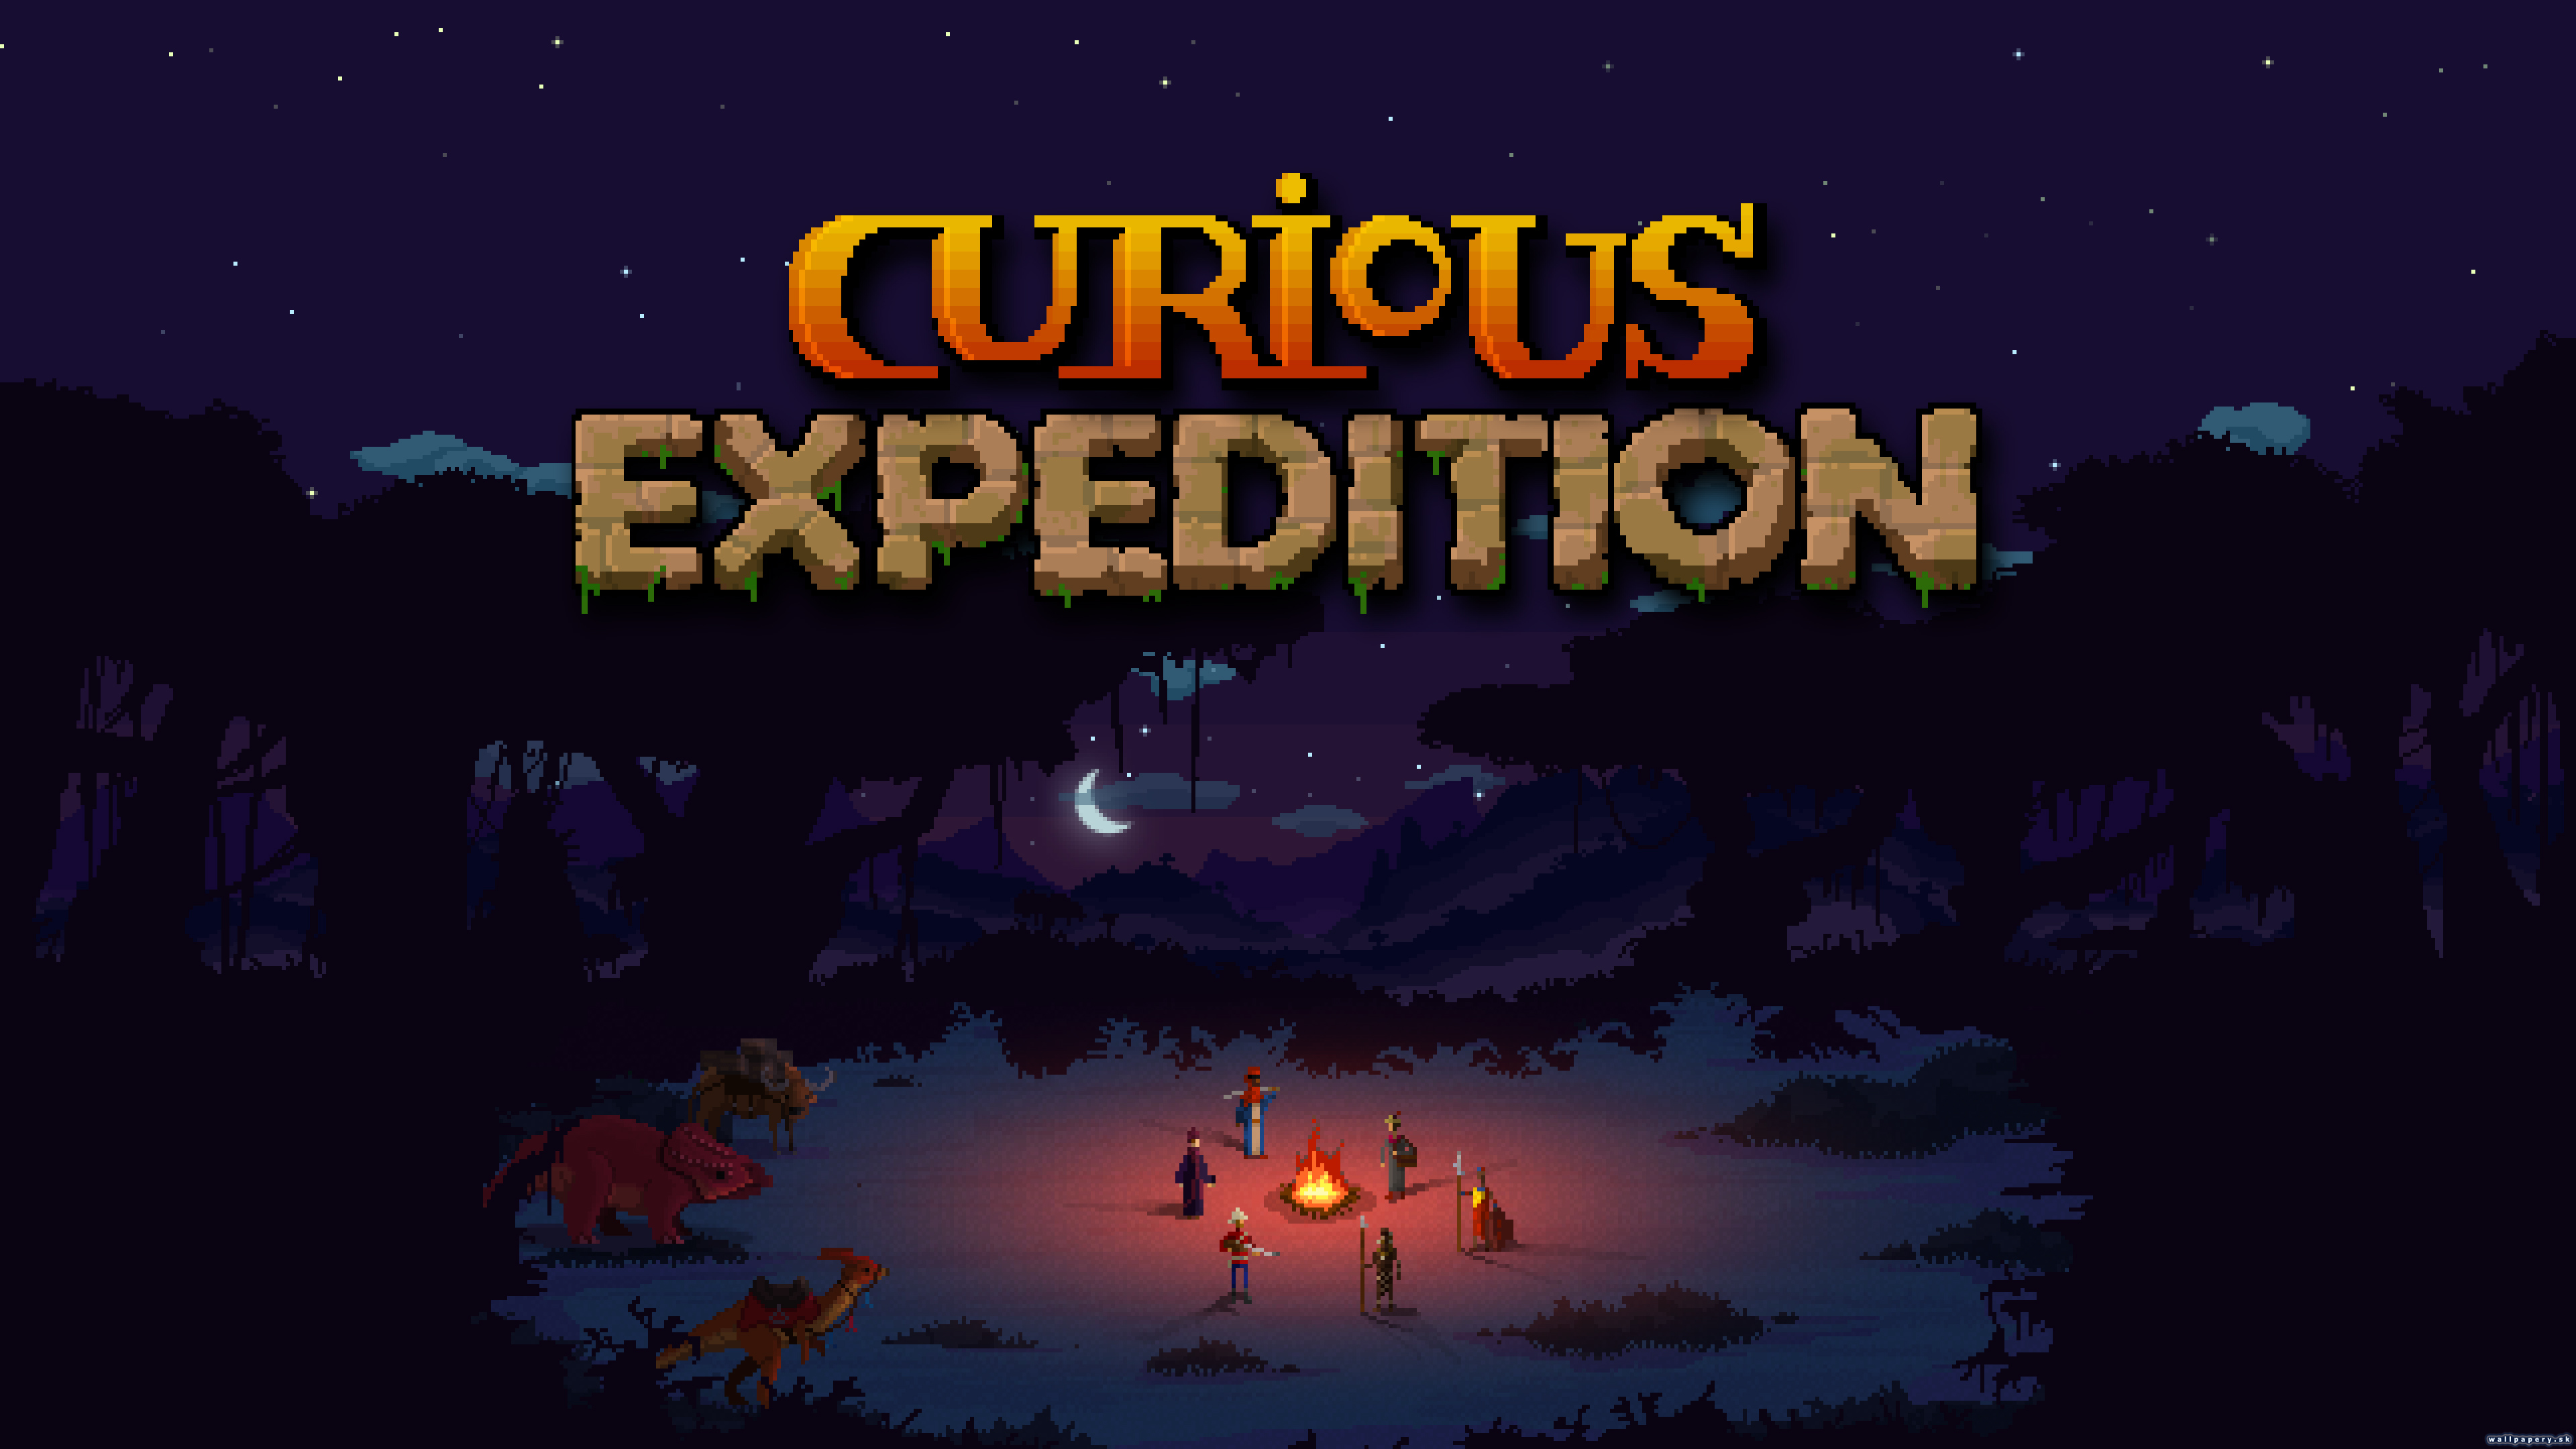 Curious Expedition - wallpaper 5